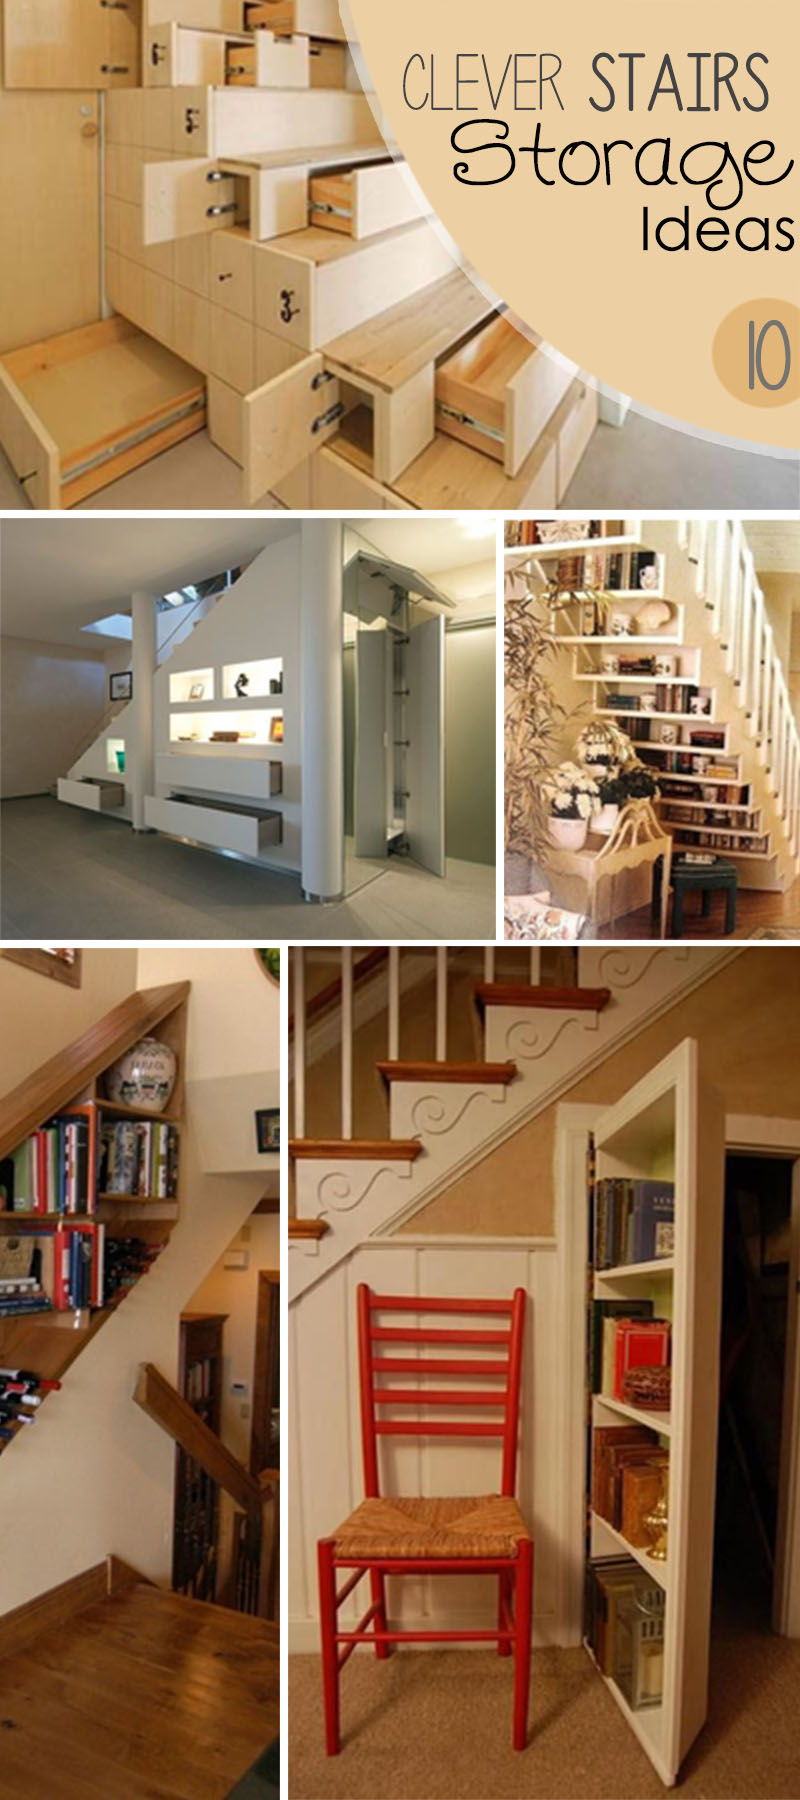 Clever Stairs Storage Ideas!